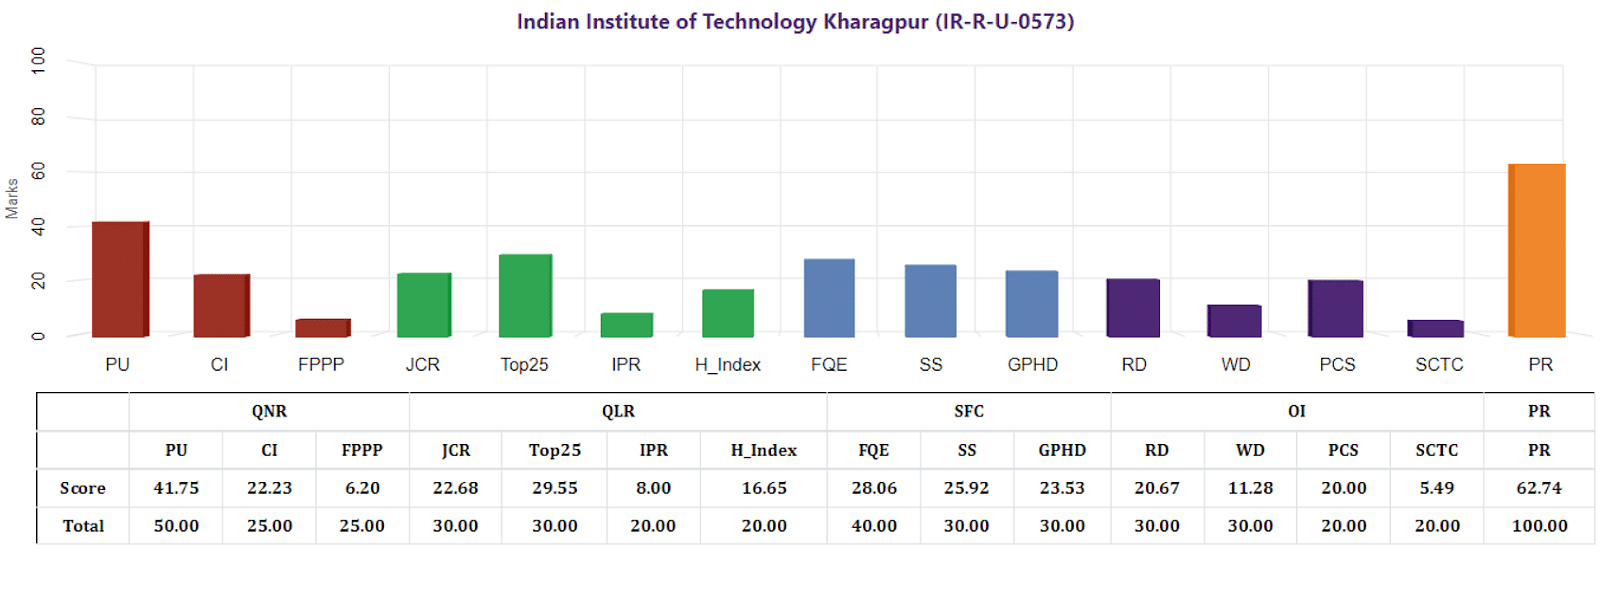 The graphical data of IIT Kharagpur’s Research rankings by NIRF 2023 parameter-wise score is given below: